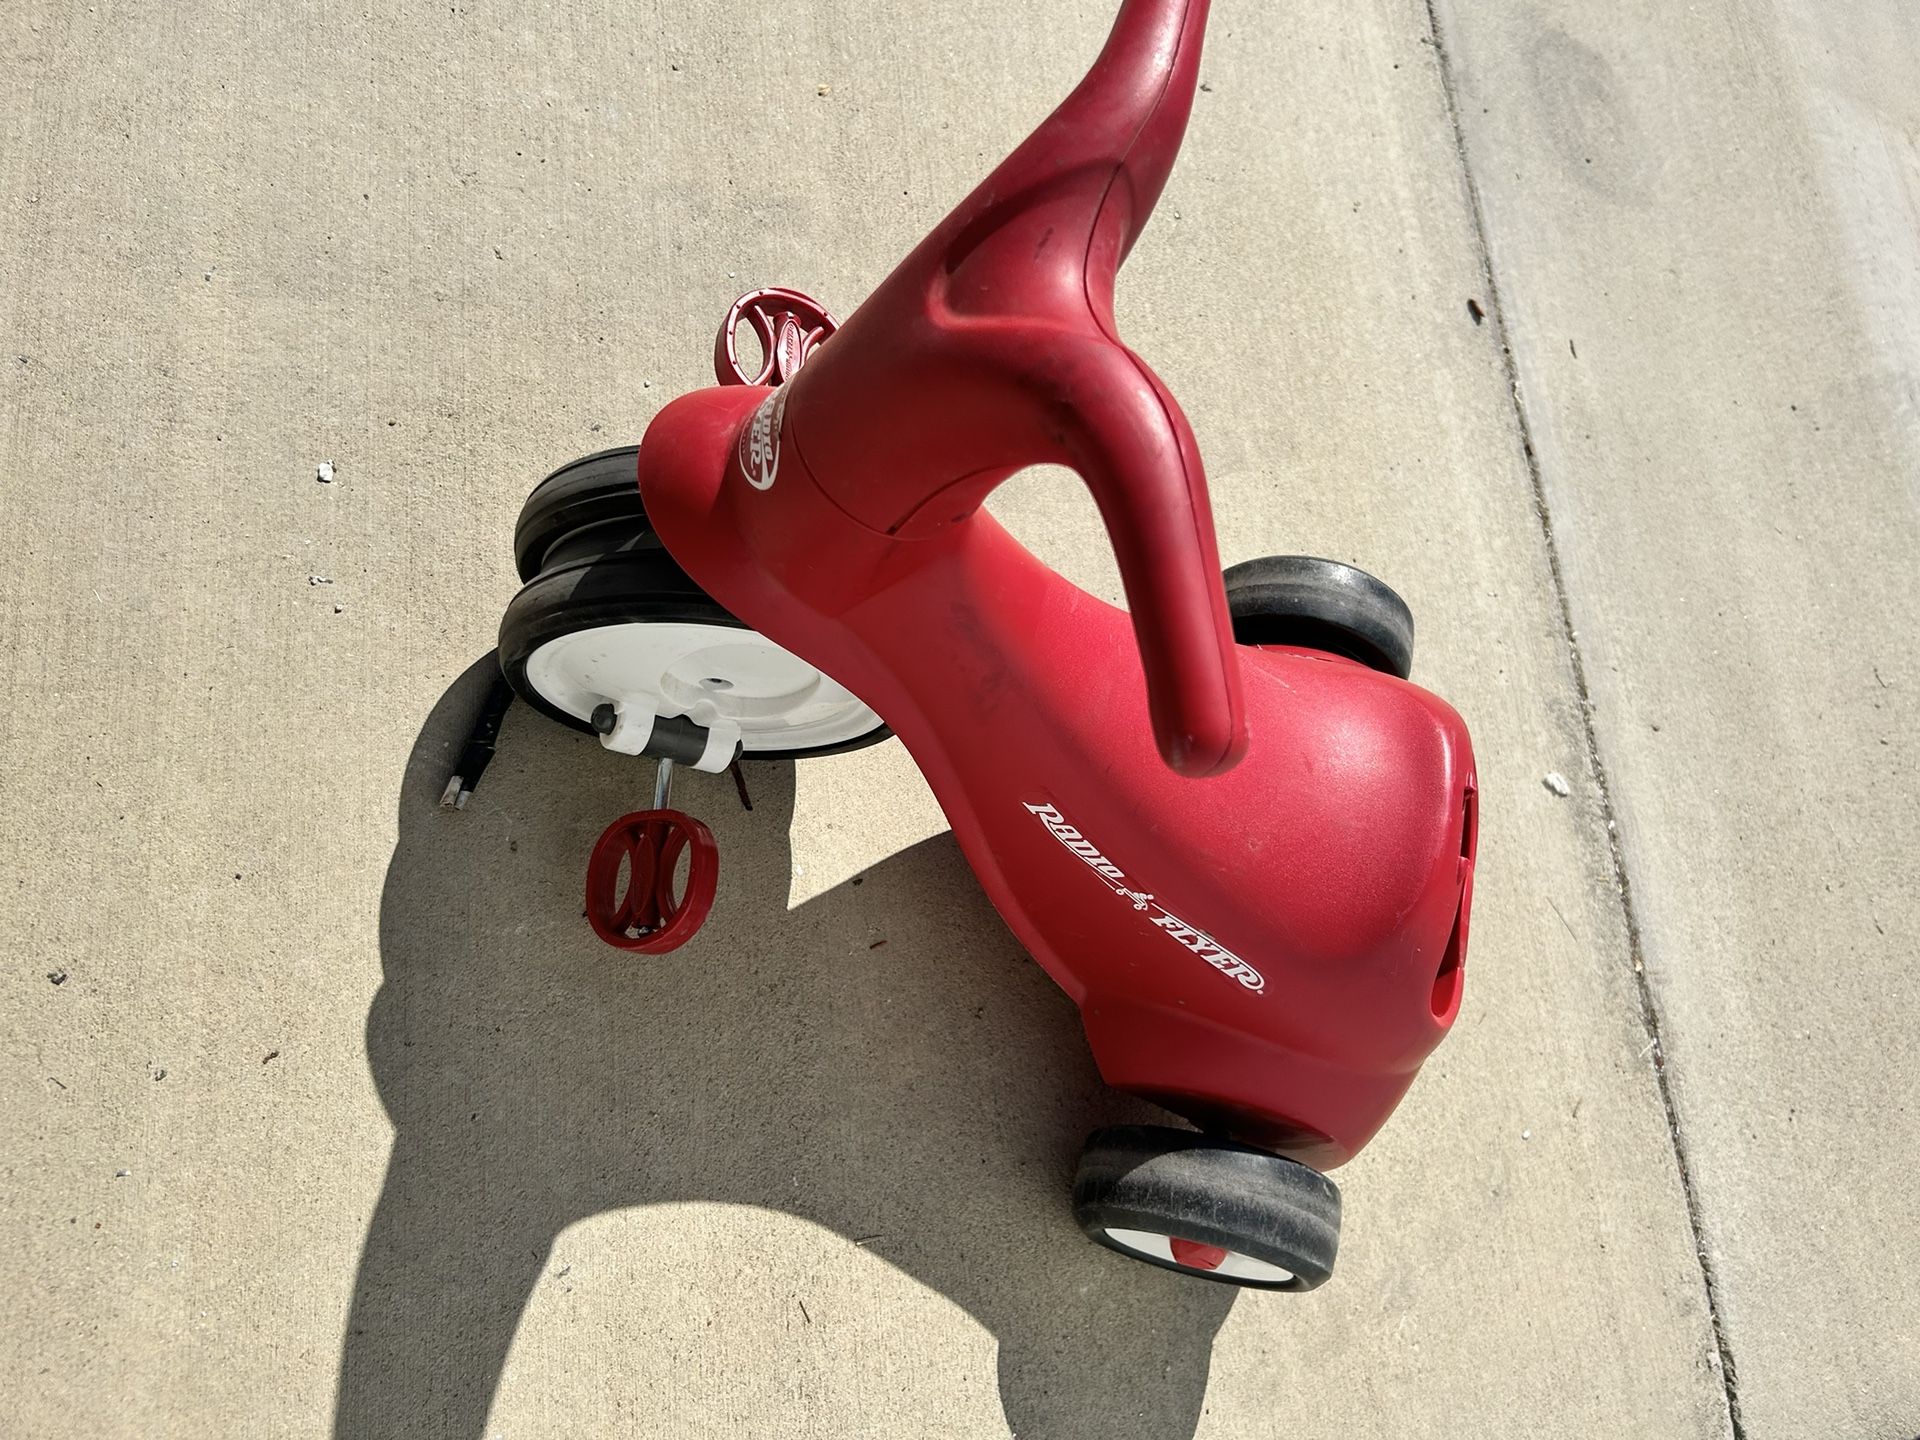 Radio Flyer Toy For Kids 